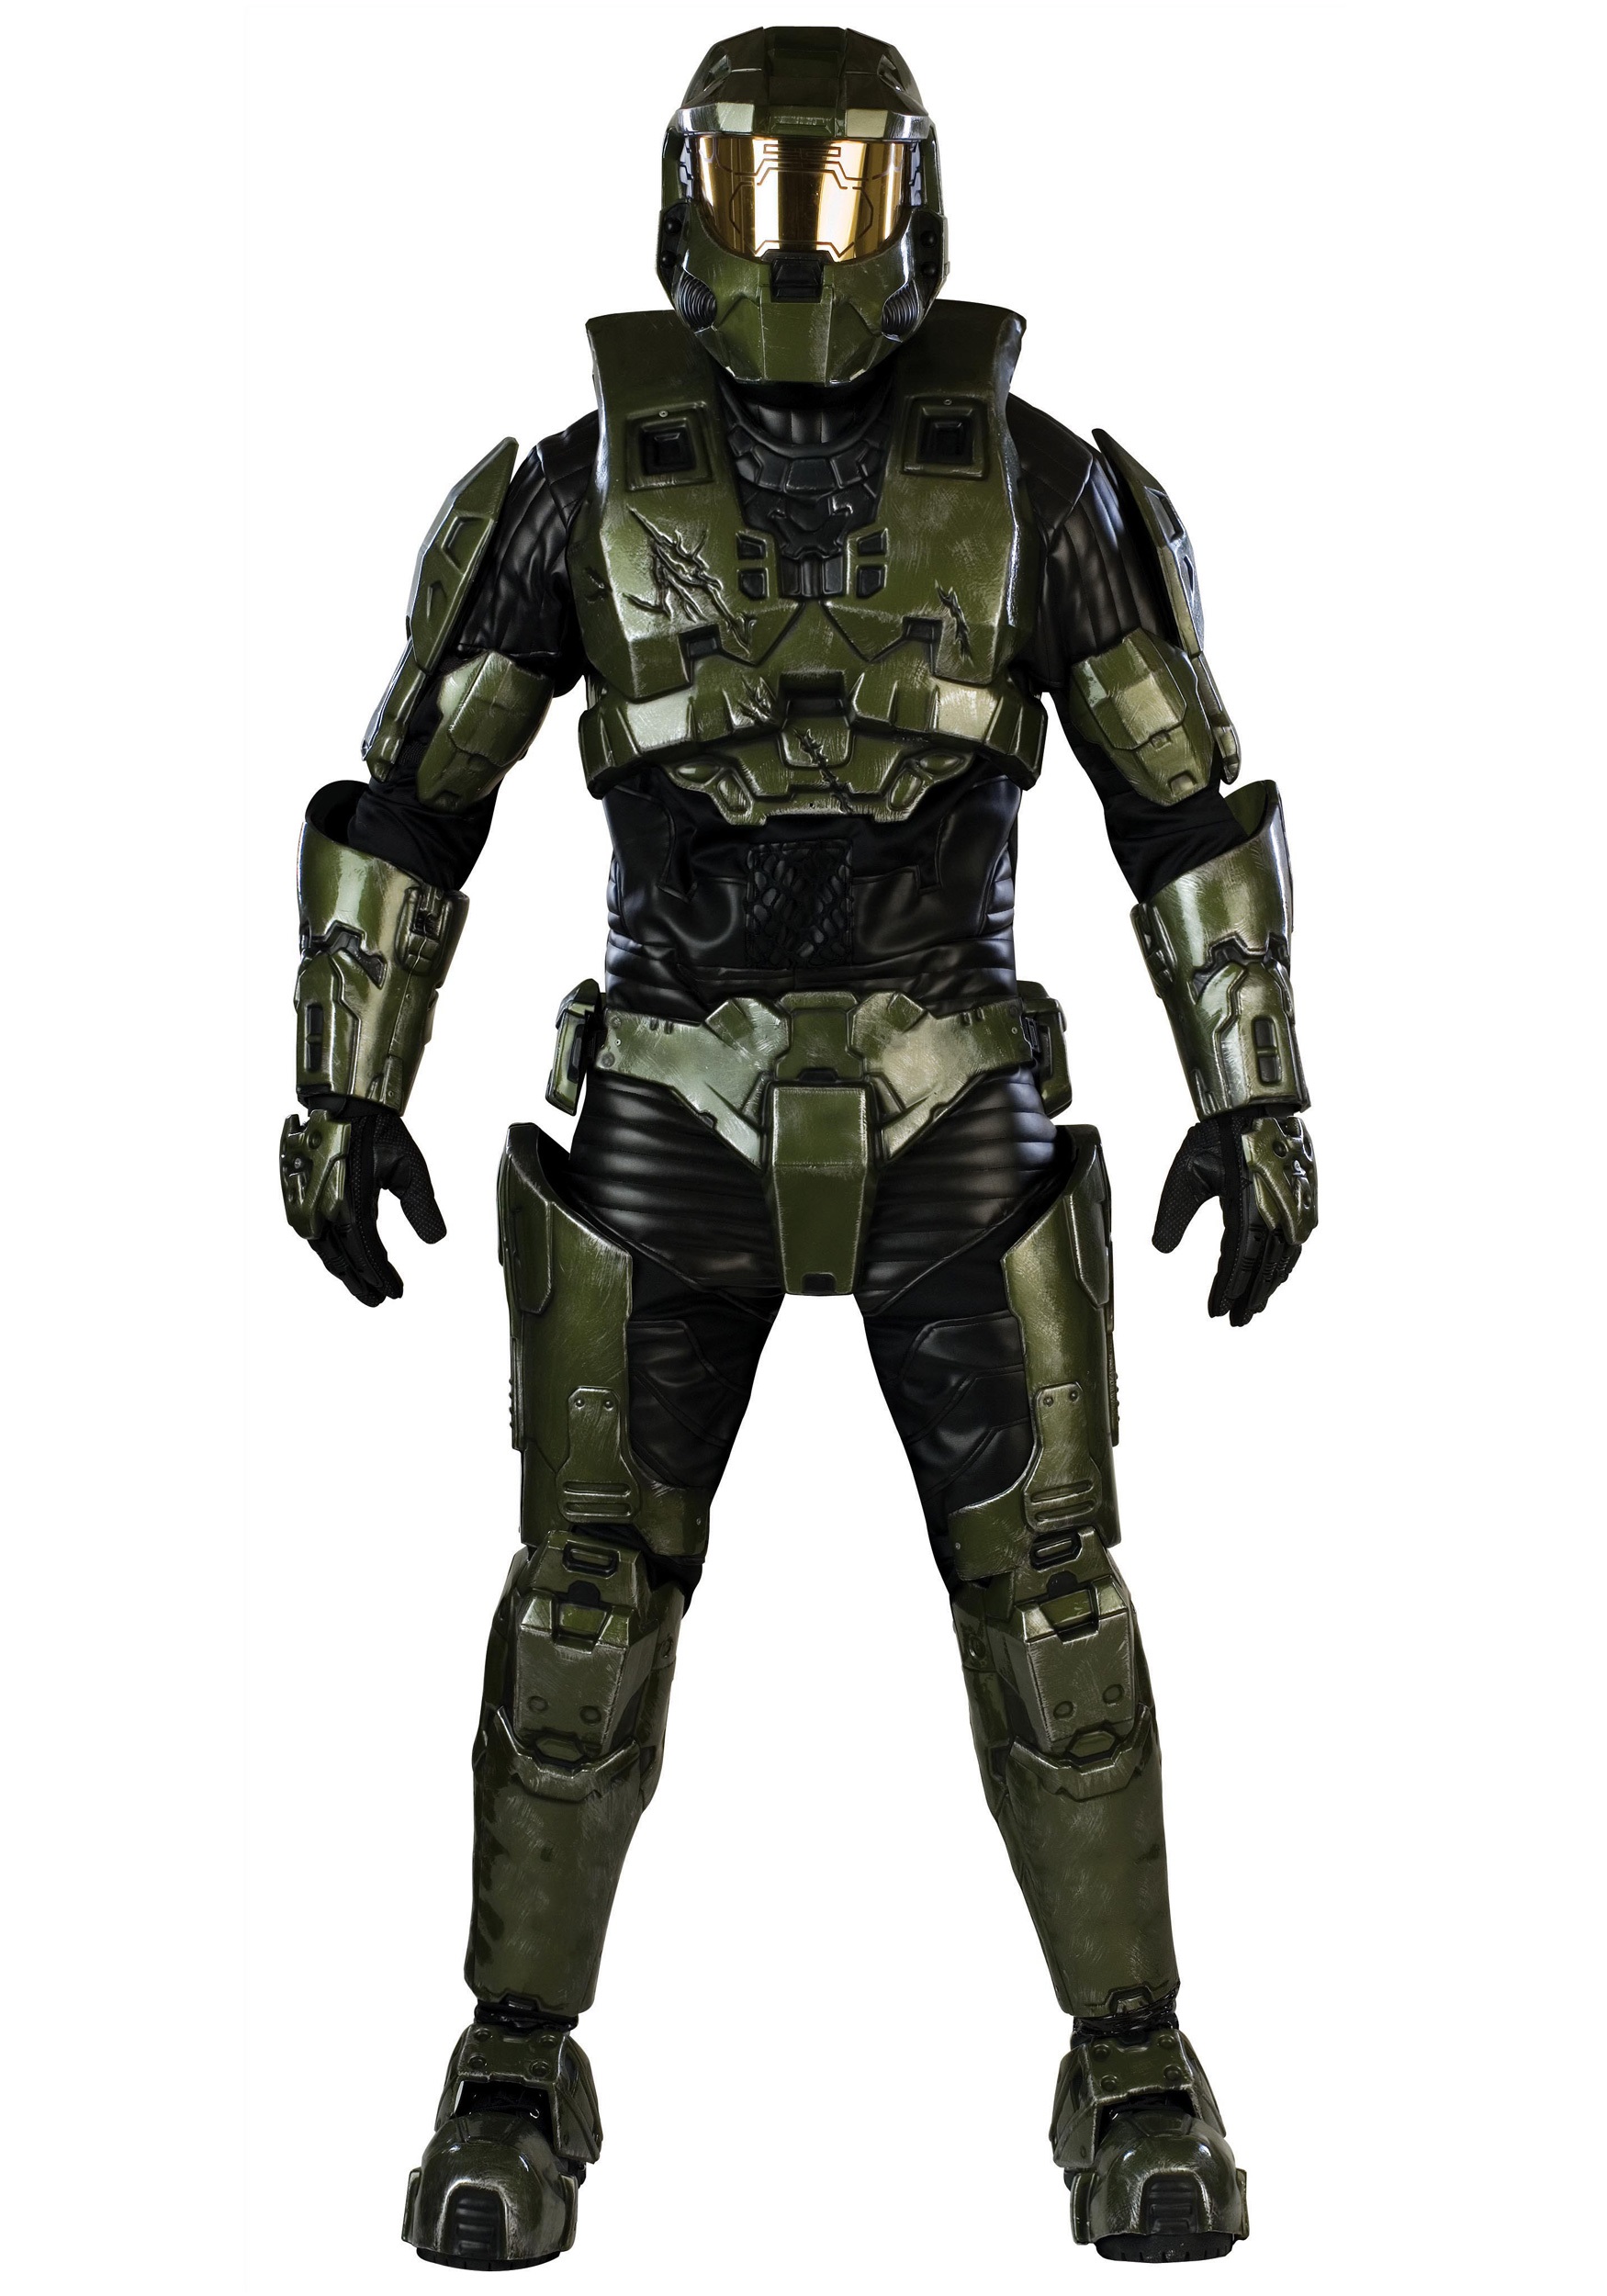 Shining Power Part Collector's Halo Master Chief Costume - Halloween Costume Ideas 2022